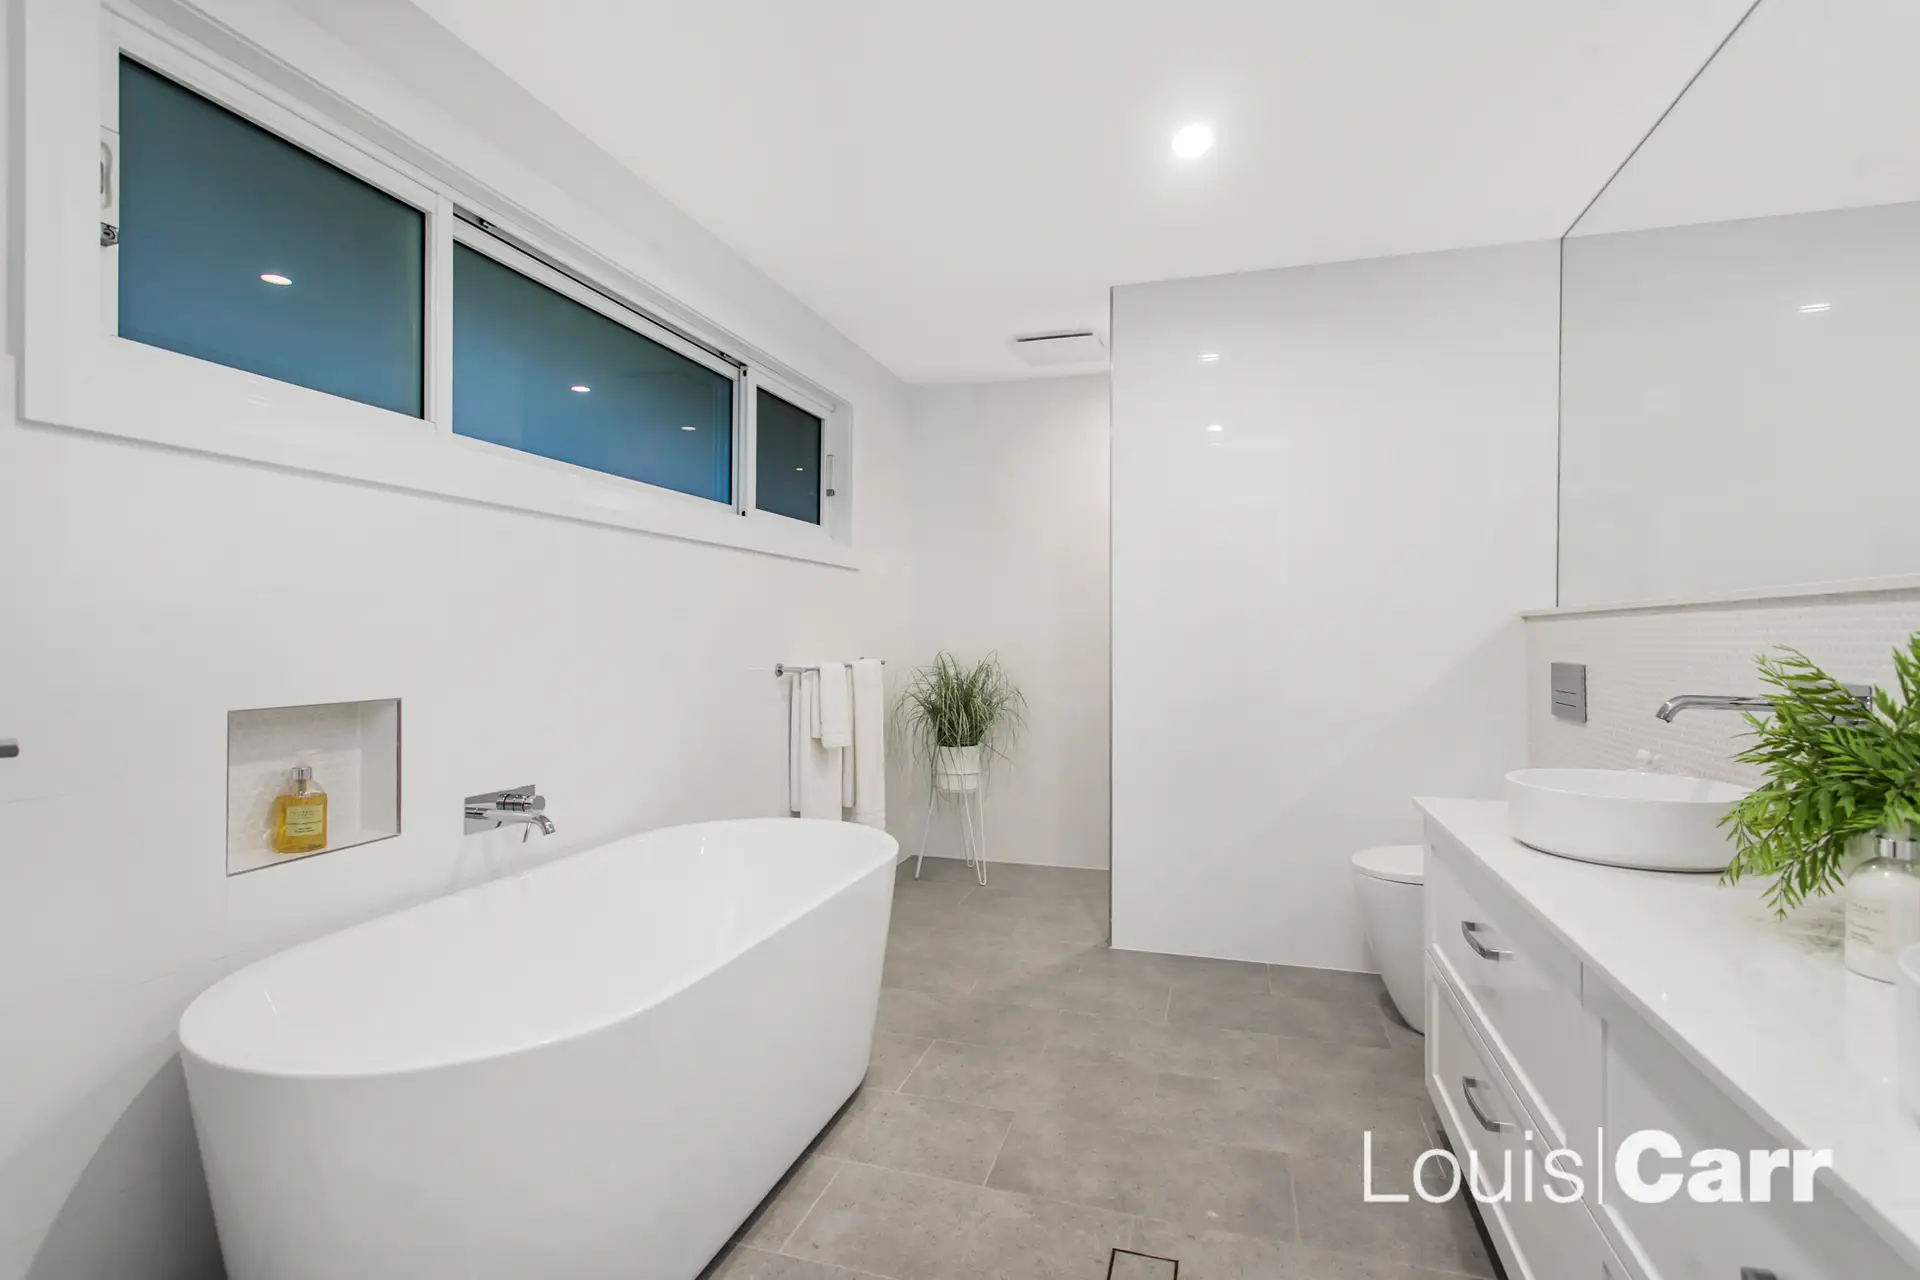 Photo #13: 2a Salisbury Downs Drive, West Pennant Hills - Sold by Louis Carr Real Estate